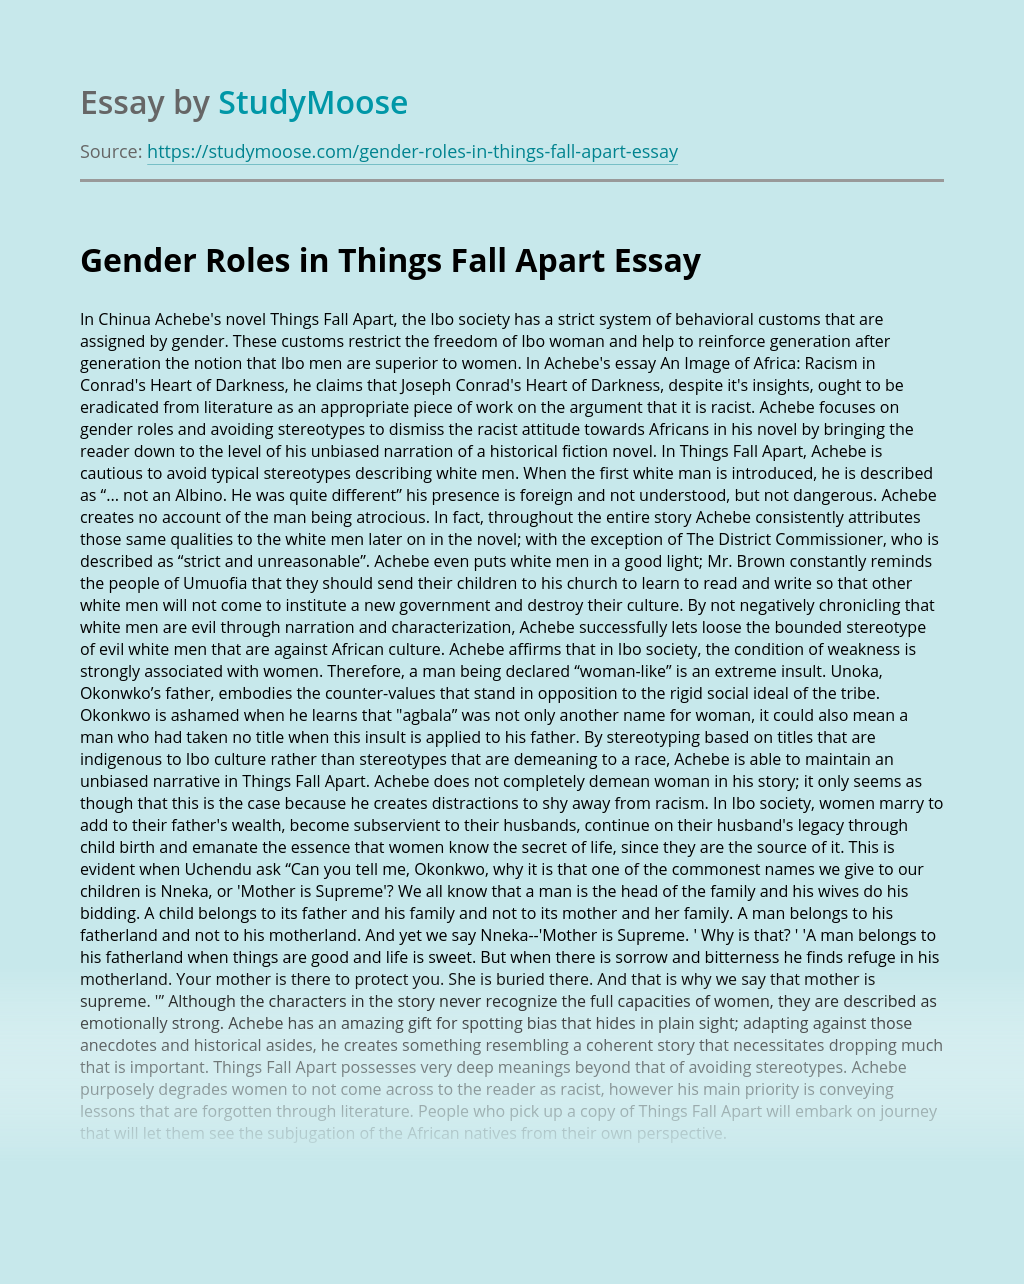 a title for an essay about gender roles